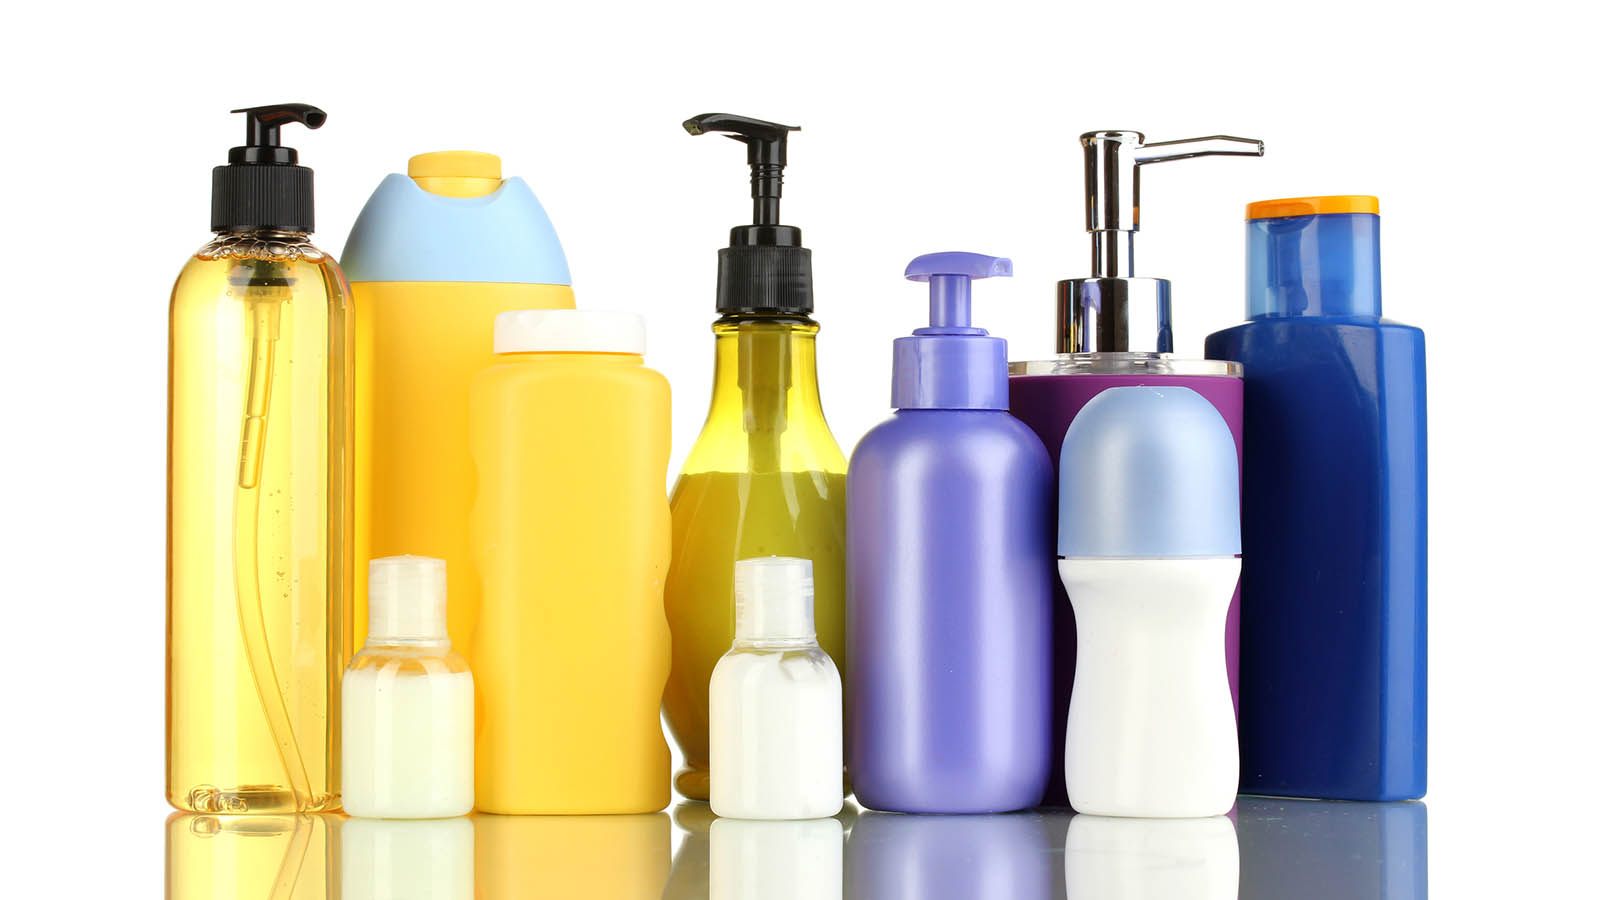 Cosmetic Packaging Market: Growing Demand for Innovative and Sustainable Packaging Solutions